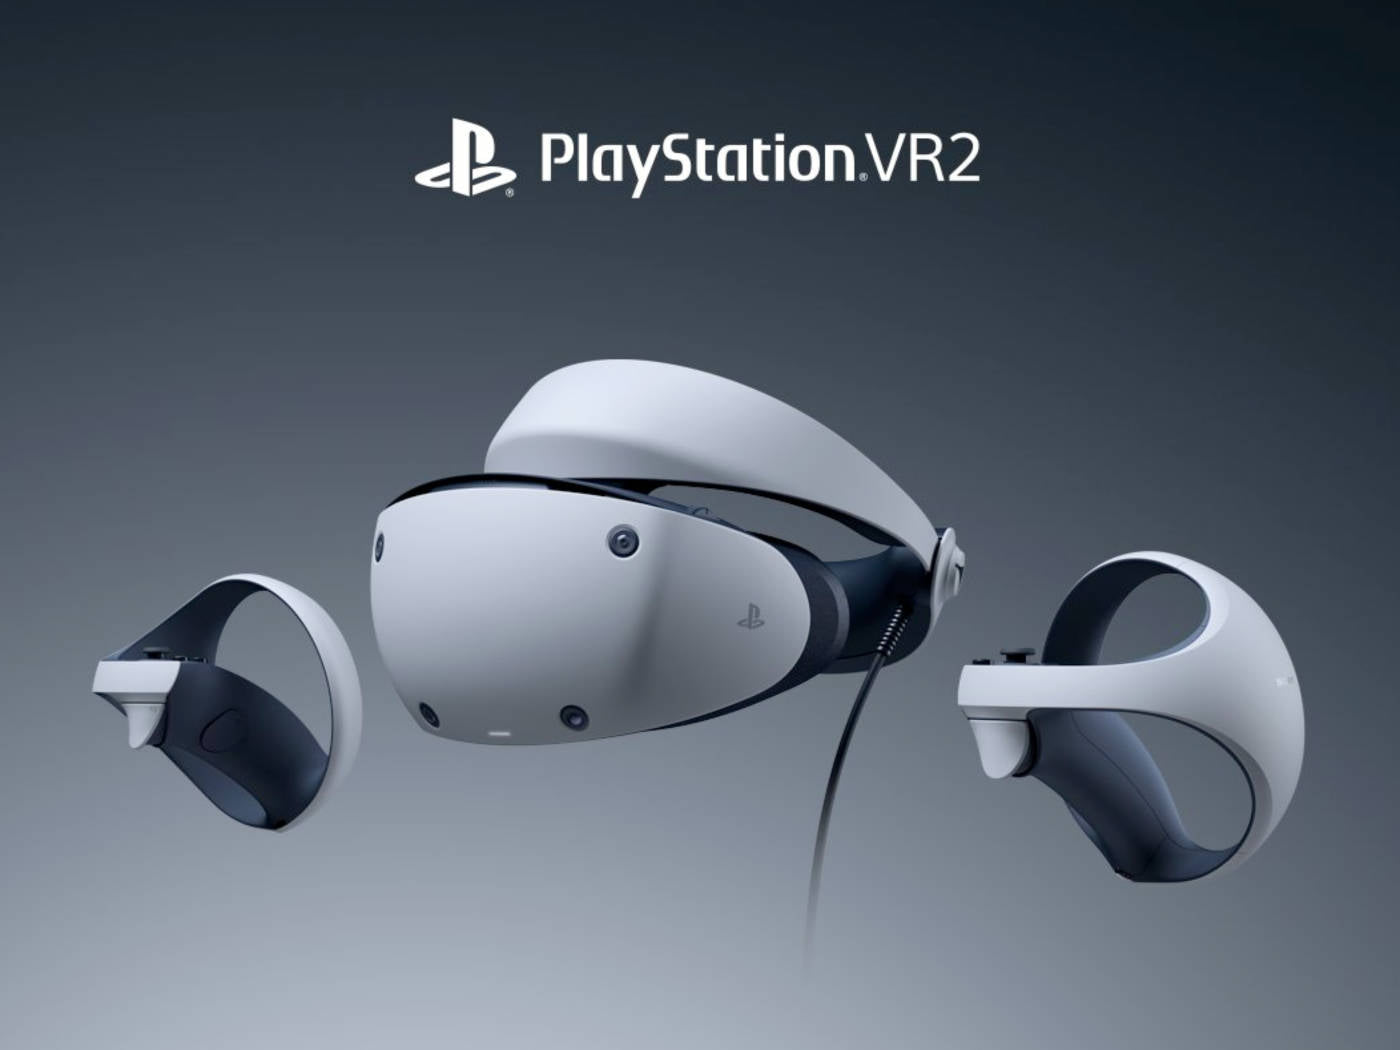 PSVR2: Specs, Games, And Everything Else You Need To Know